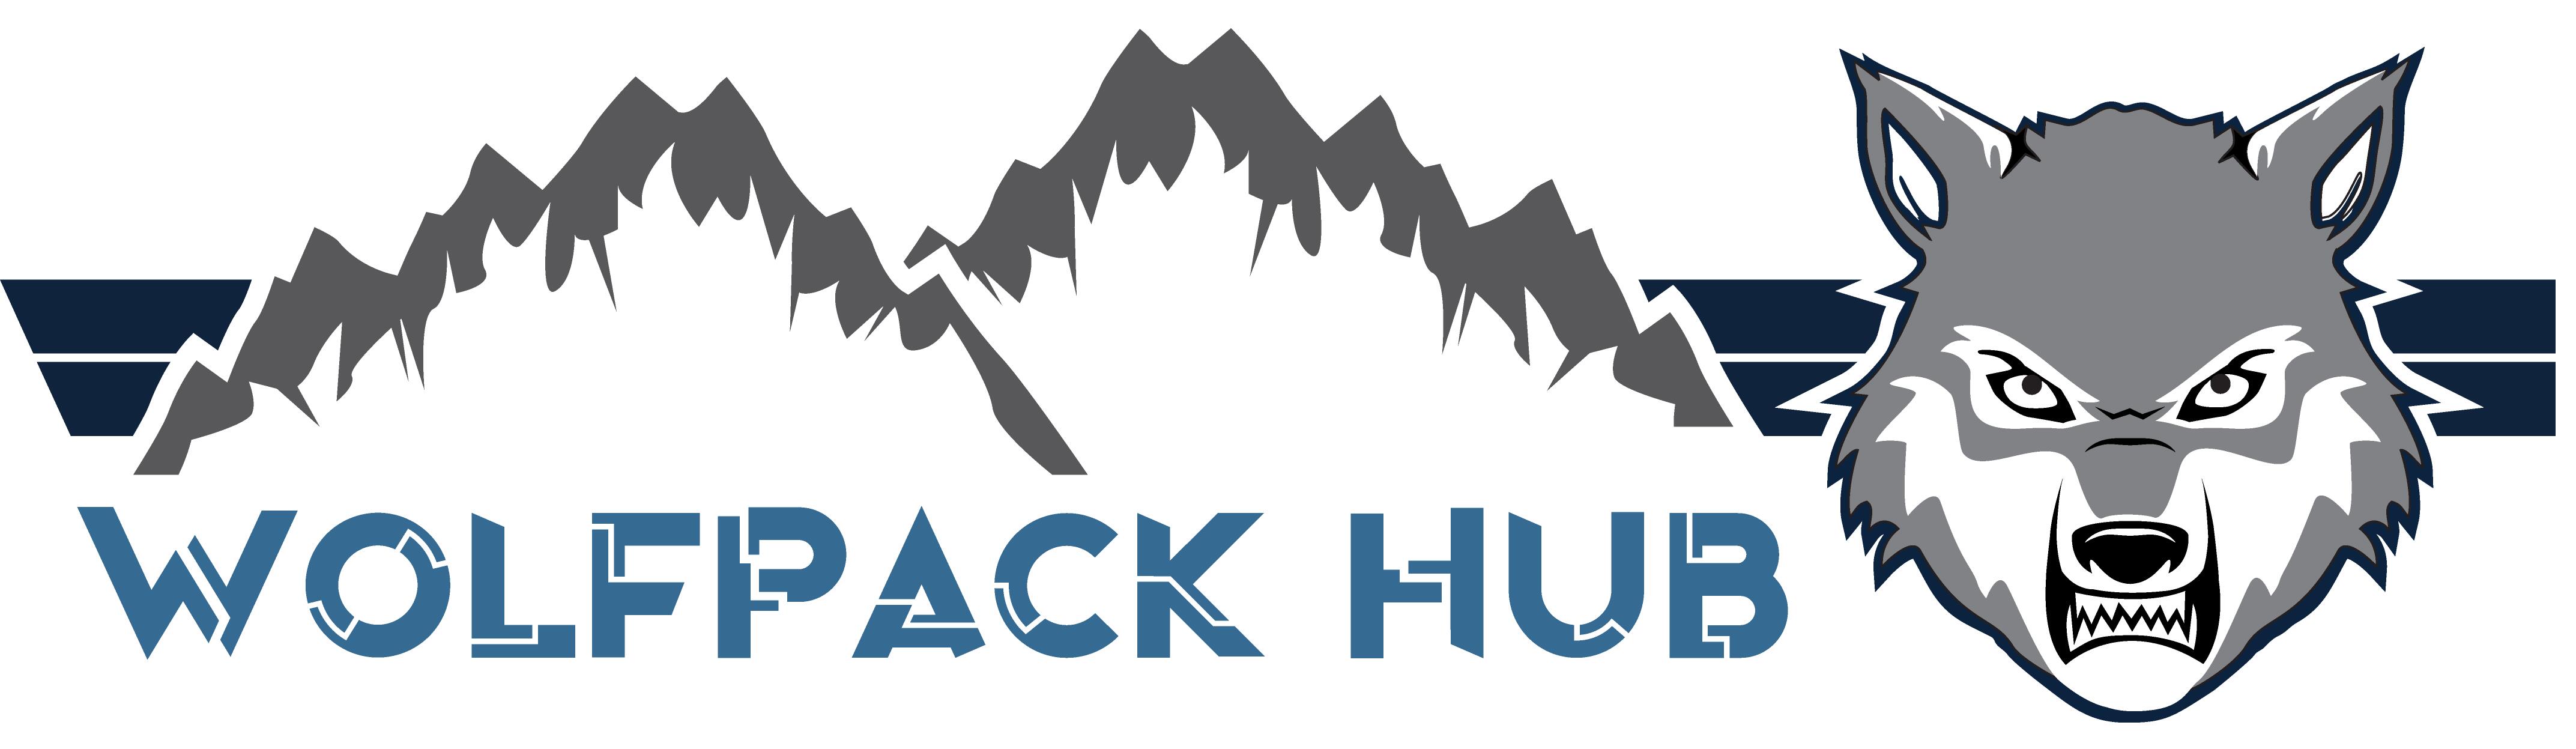 Logo with a wolf and mountains with the text "WolfPack Hub" below it